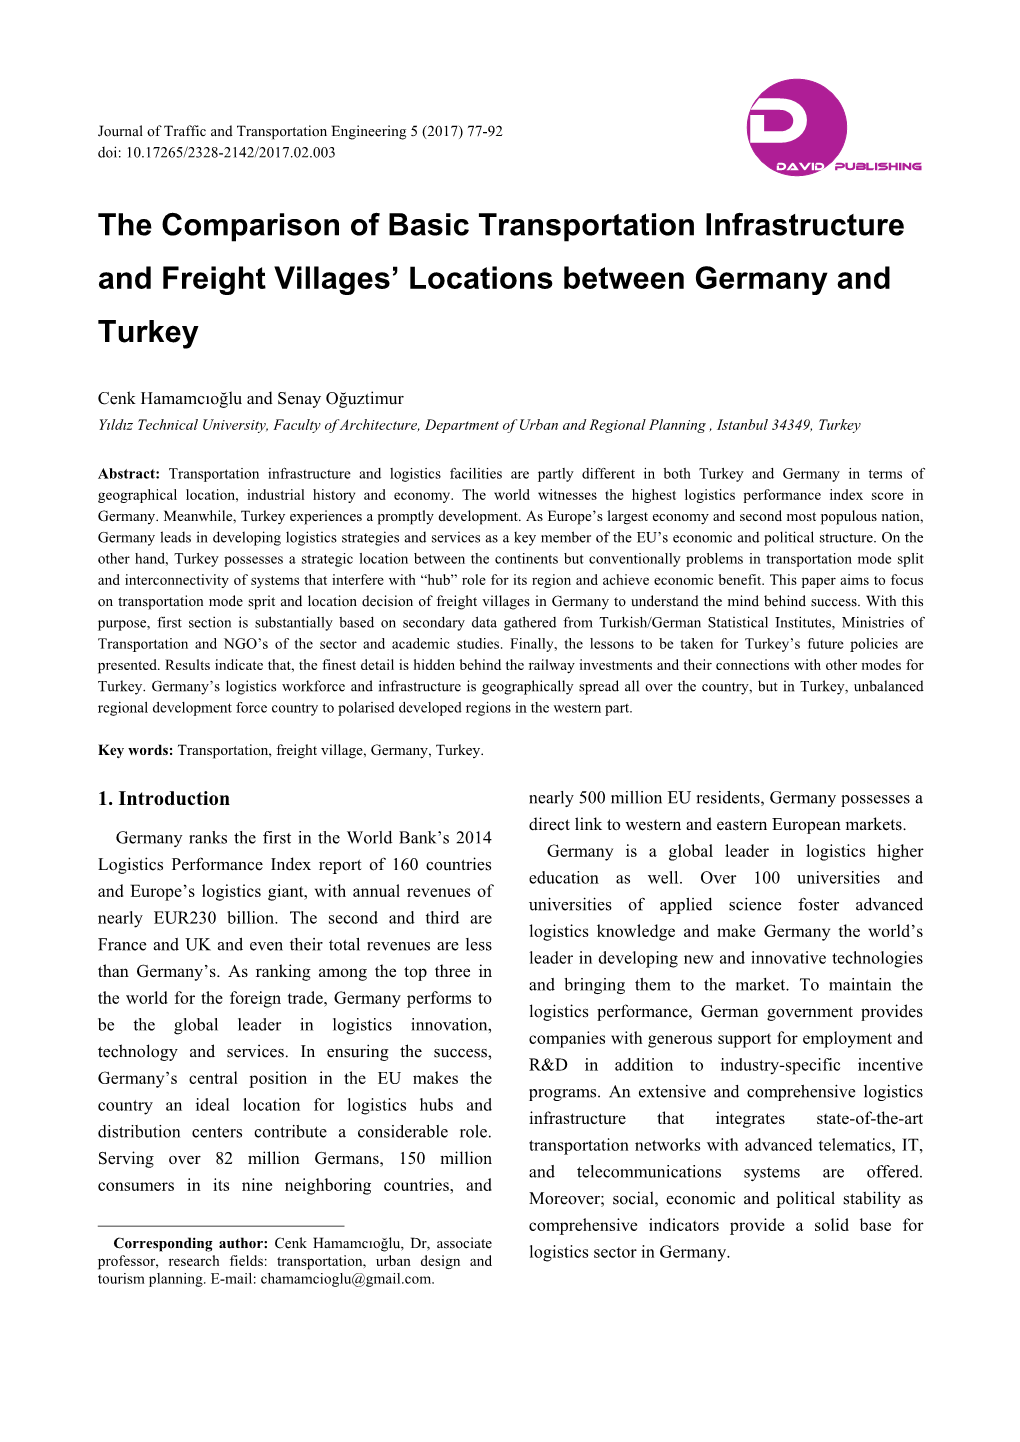 The Comparison of Basic Transportation Infrastructure and Freight Villages' Locations Between Germany and Turkey